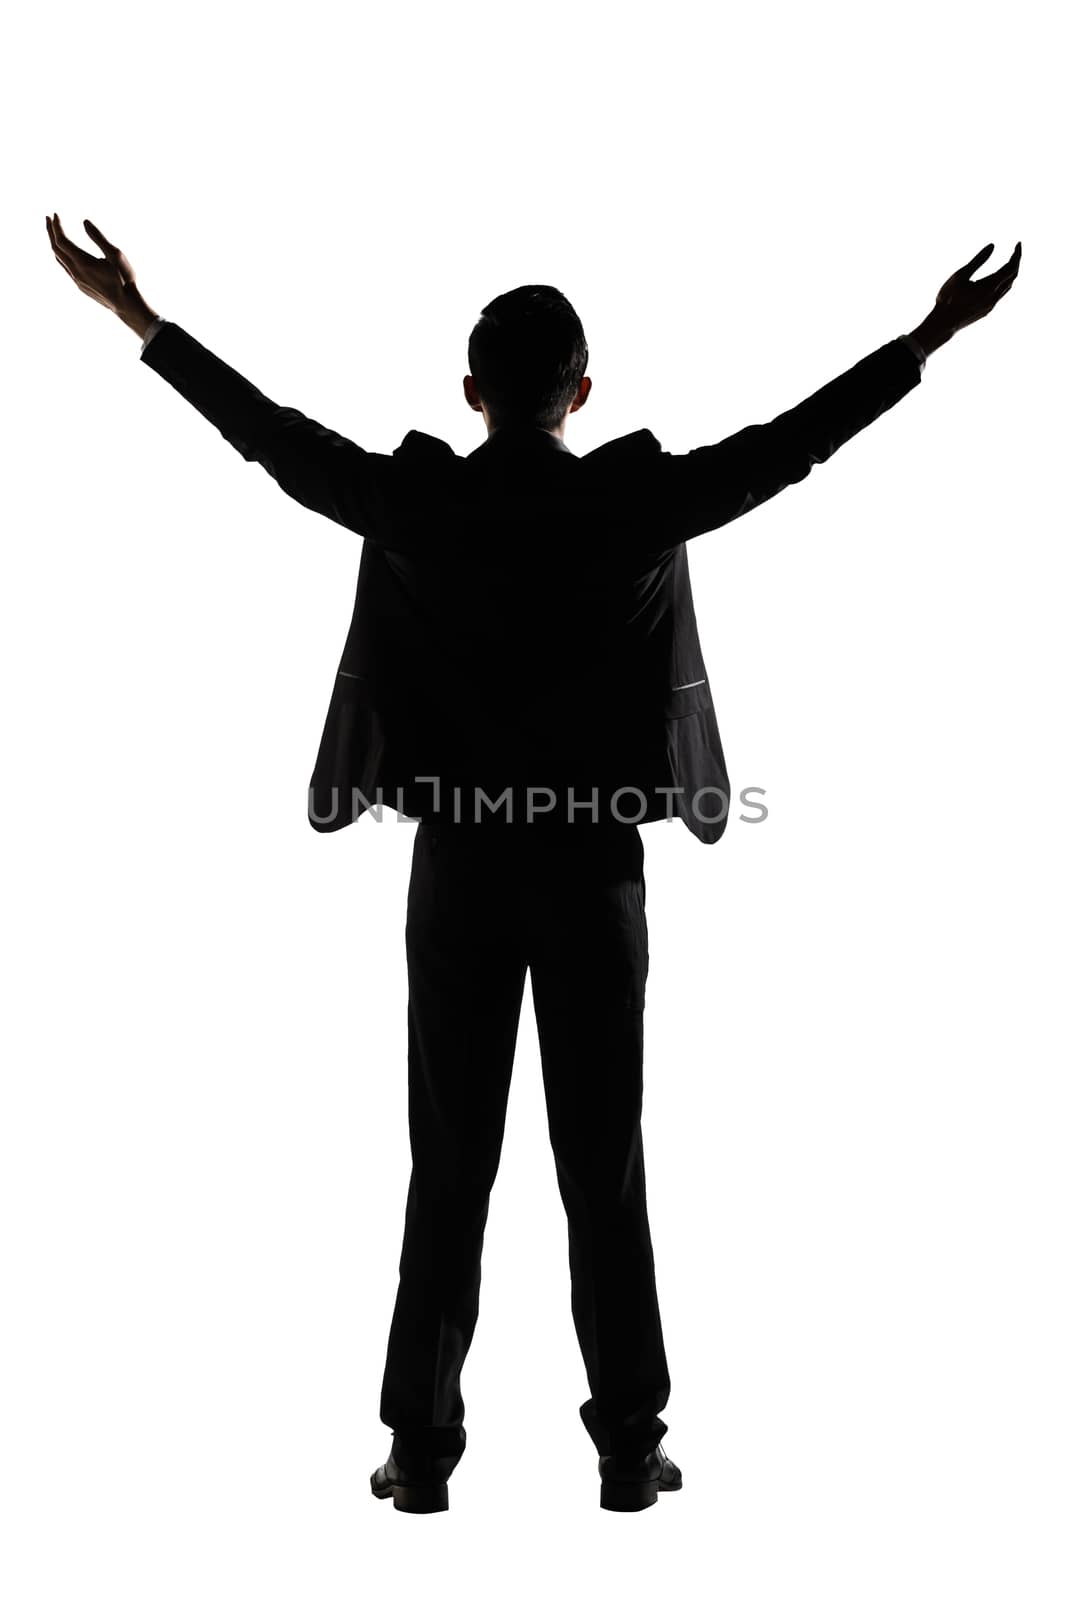 Silhouette of Asian businessman open arms feel free, rear view, full length portrait isolated on white background.